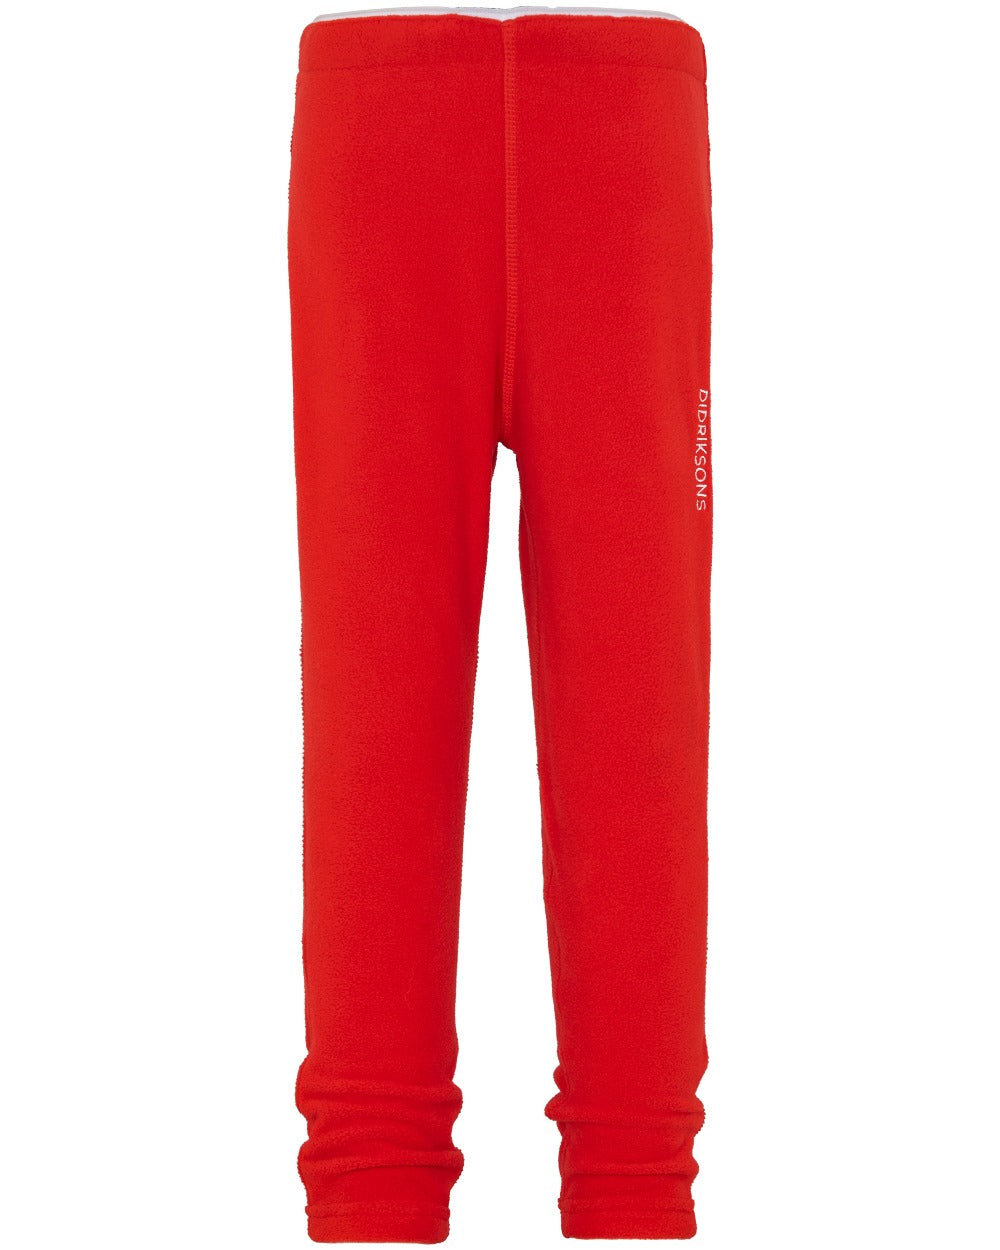 Didriksons Monte Kids Pants in Chili Red 